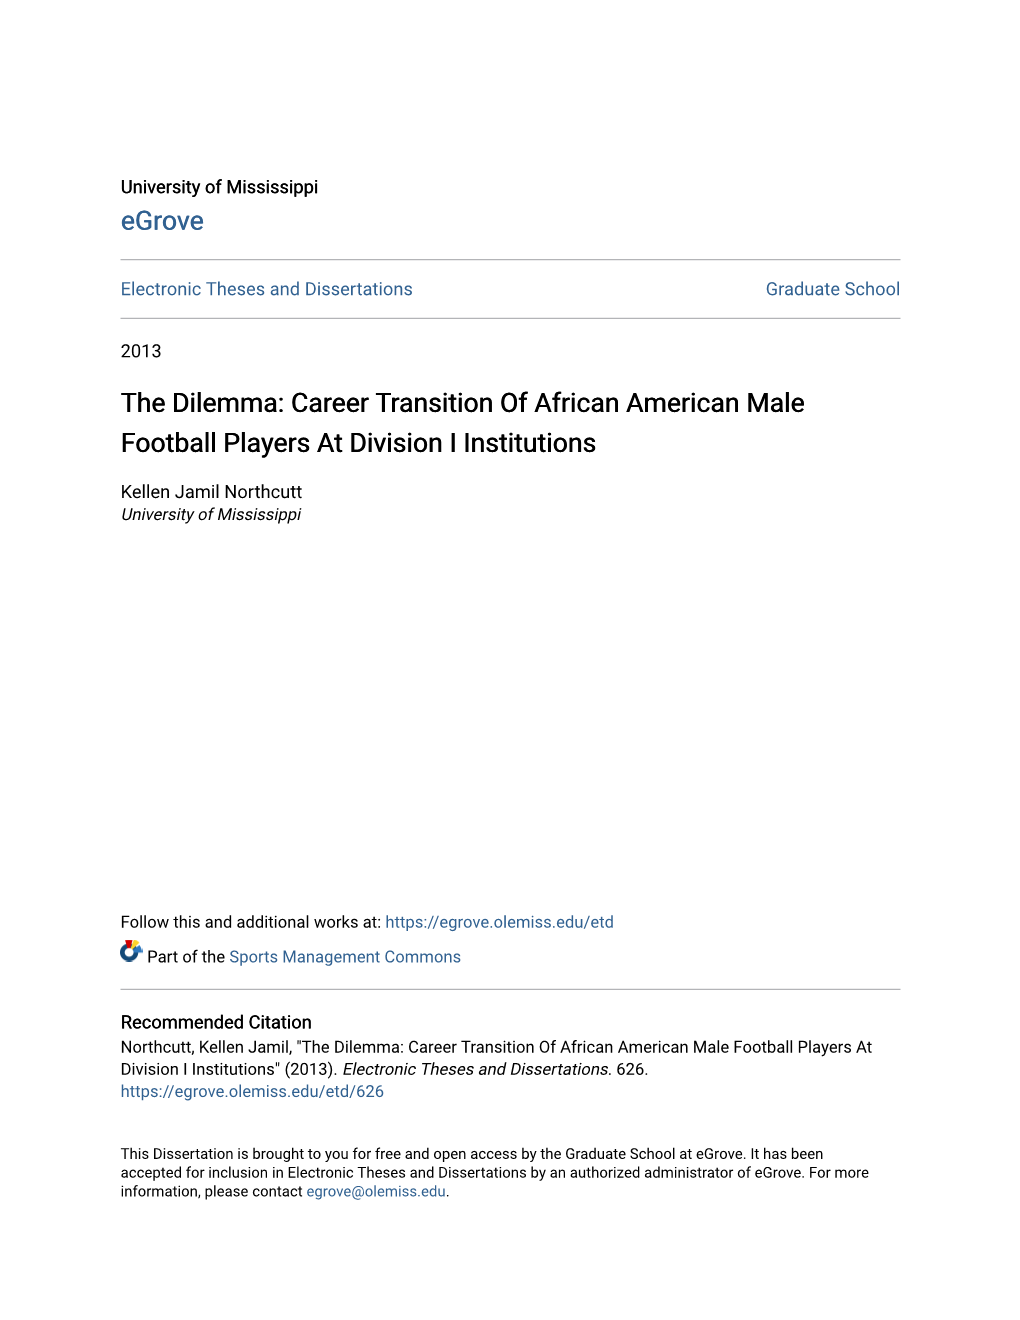 Career Transition of African American Male Football Players at Division I Institutions